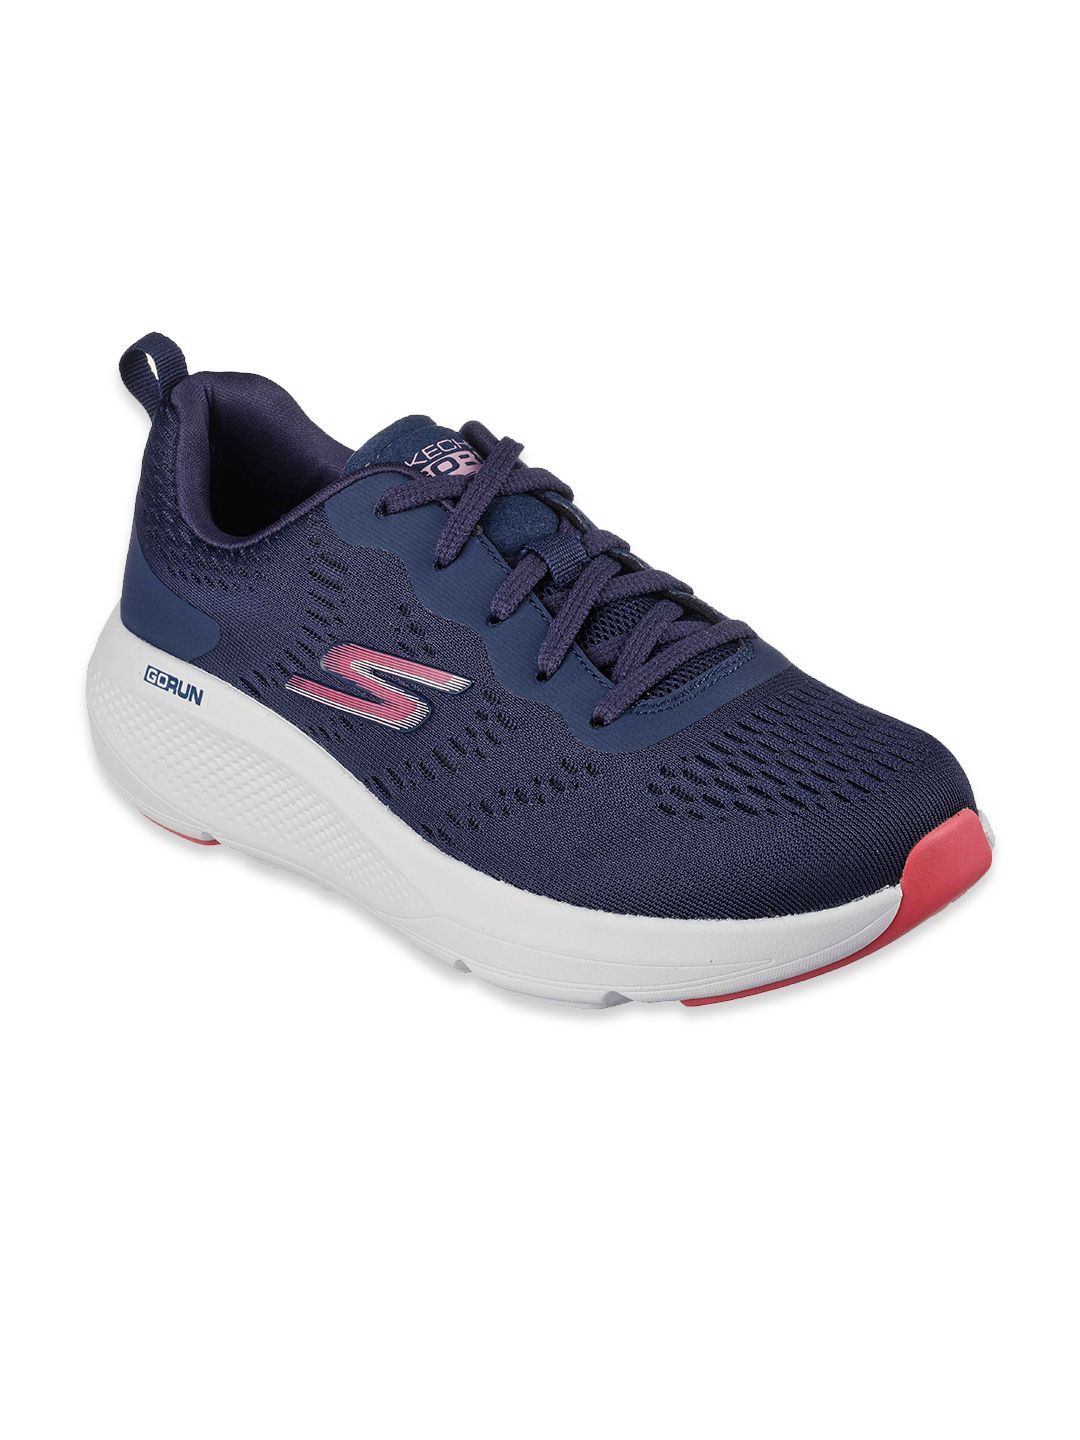 Skechers Women Navy Blue Sports Shoes Price in India